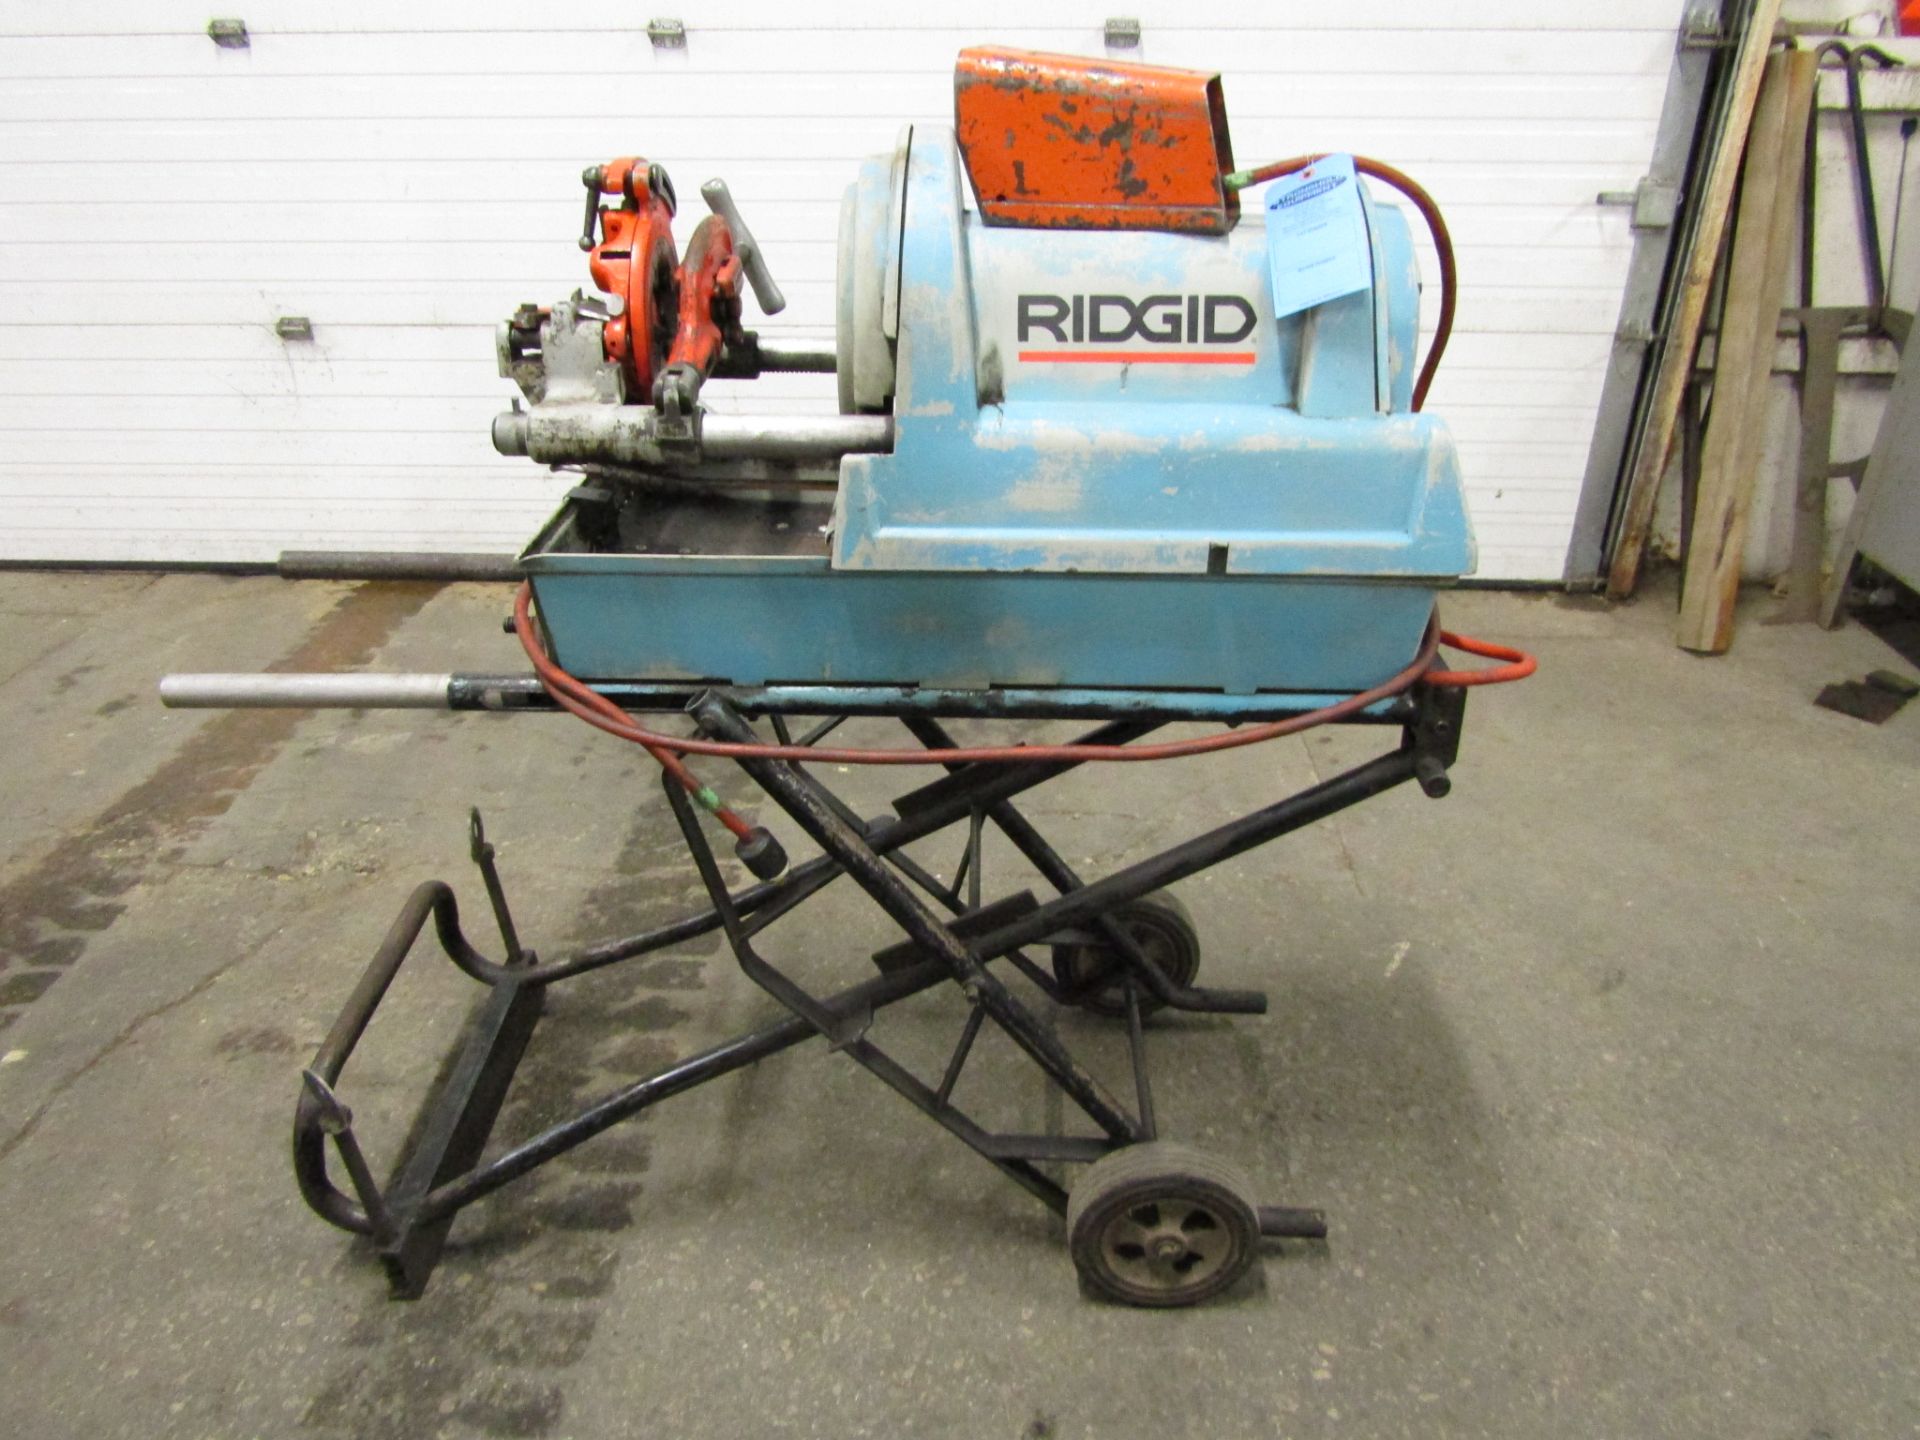 Ridgid model 1822 Pipe Threader mobile on wheels with Dies and Cutter (all included in pictures)